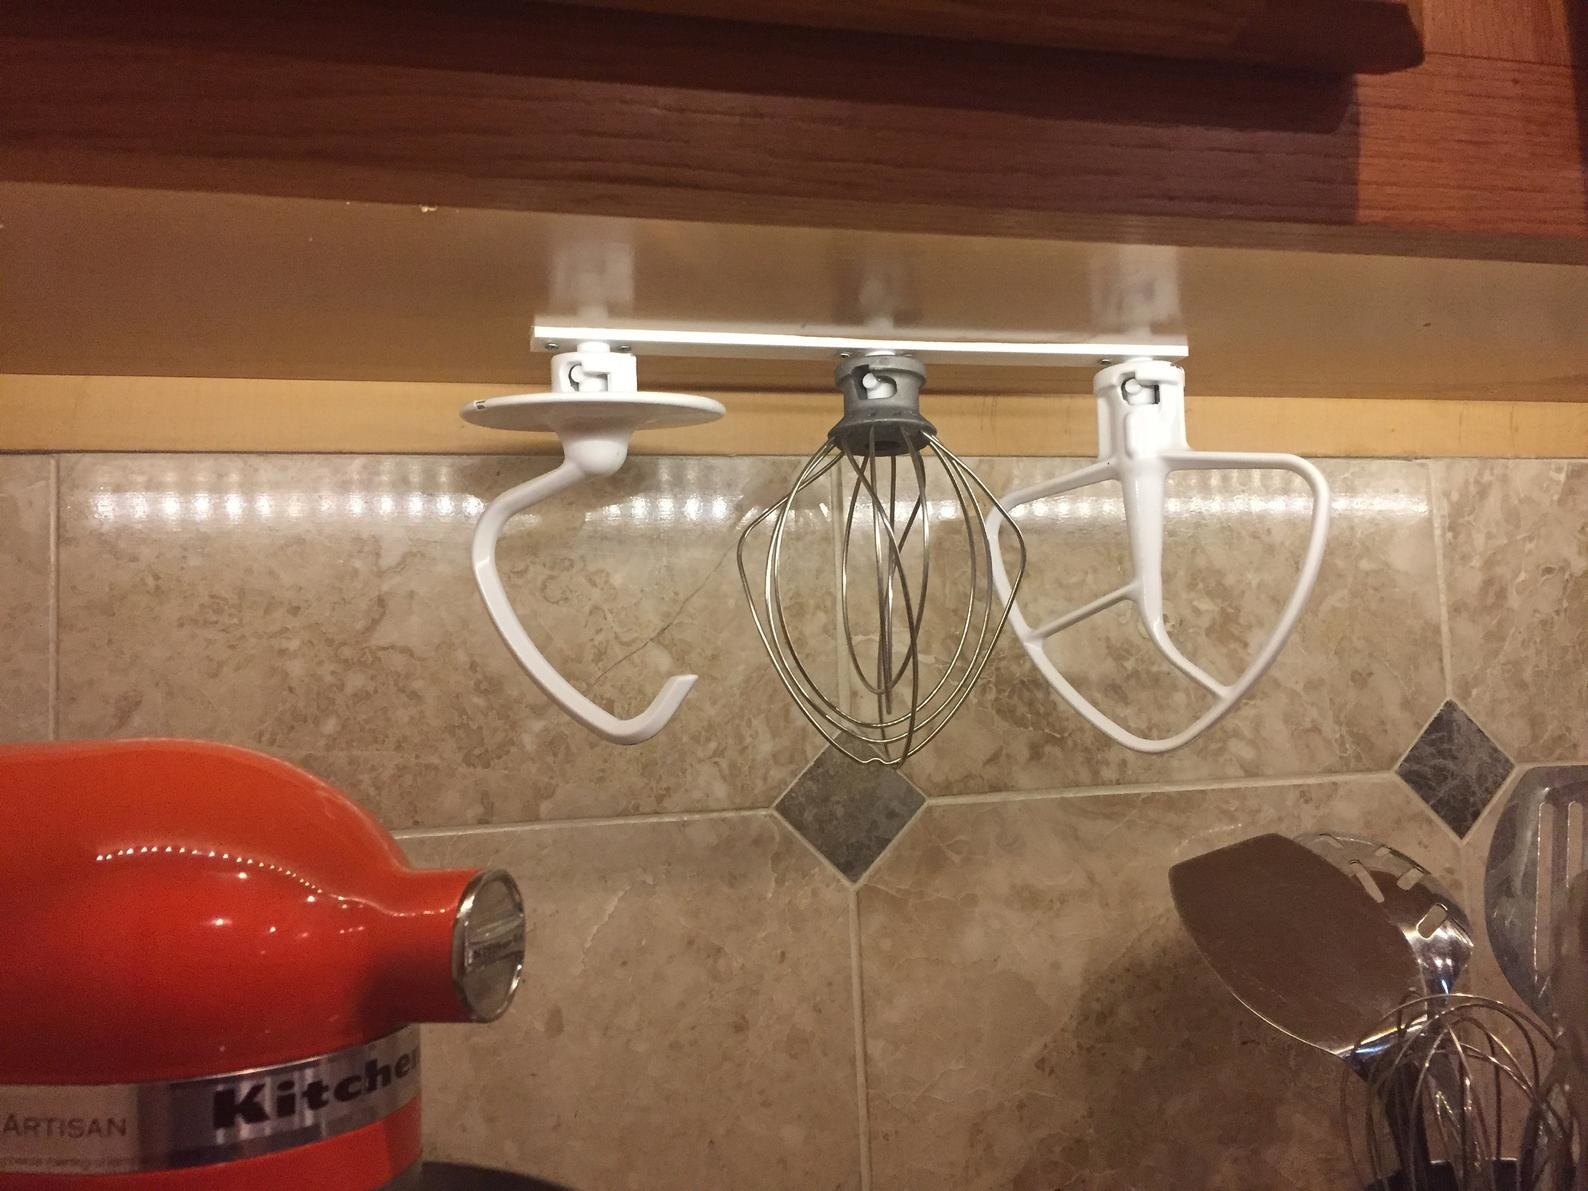 The attachments and organizer hanging from a cabinet